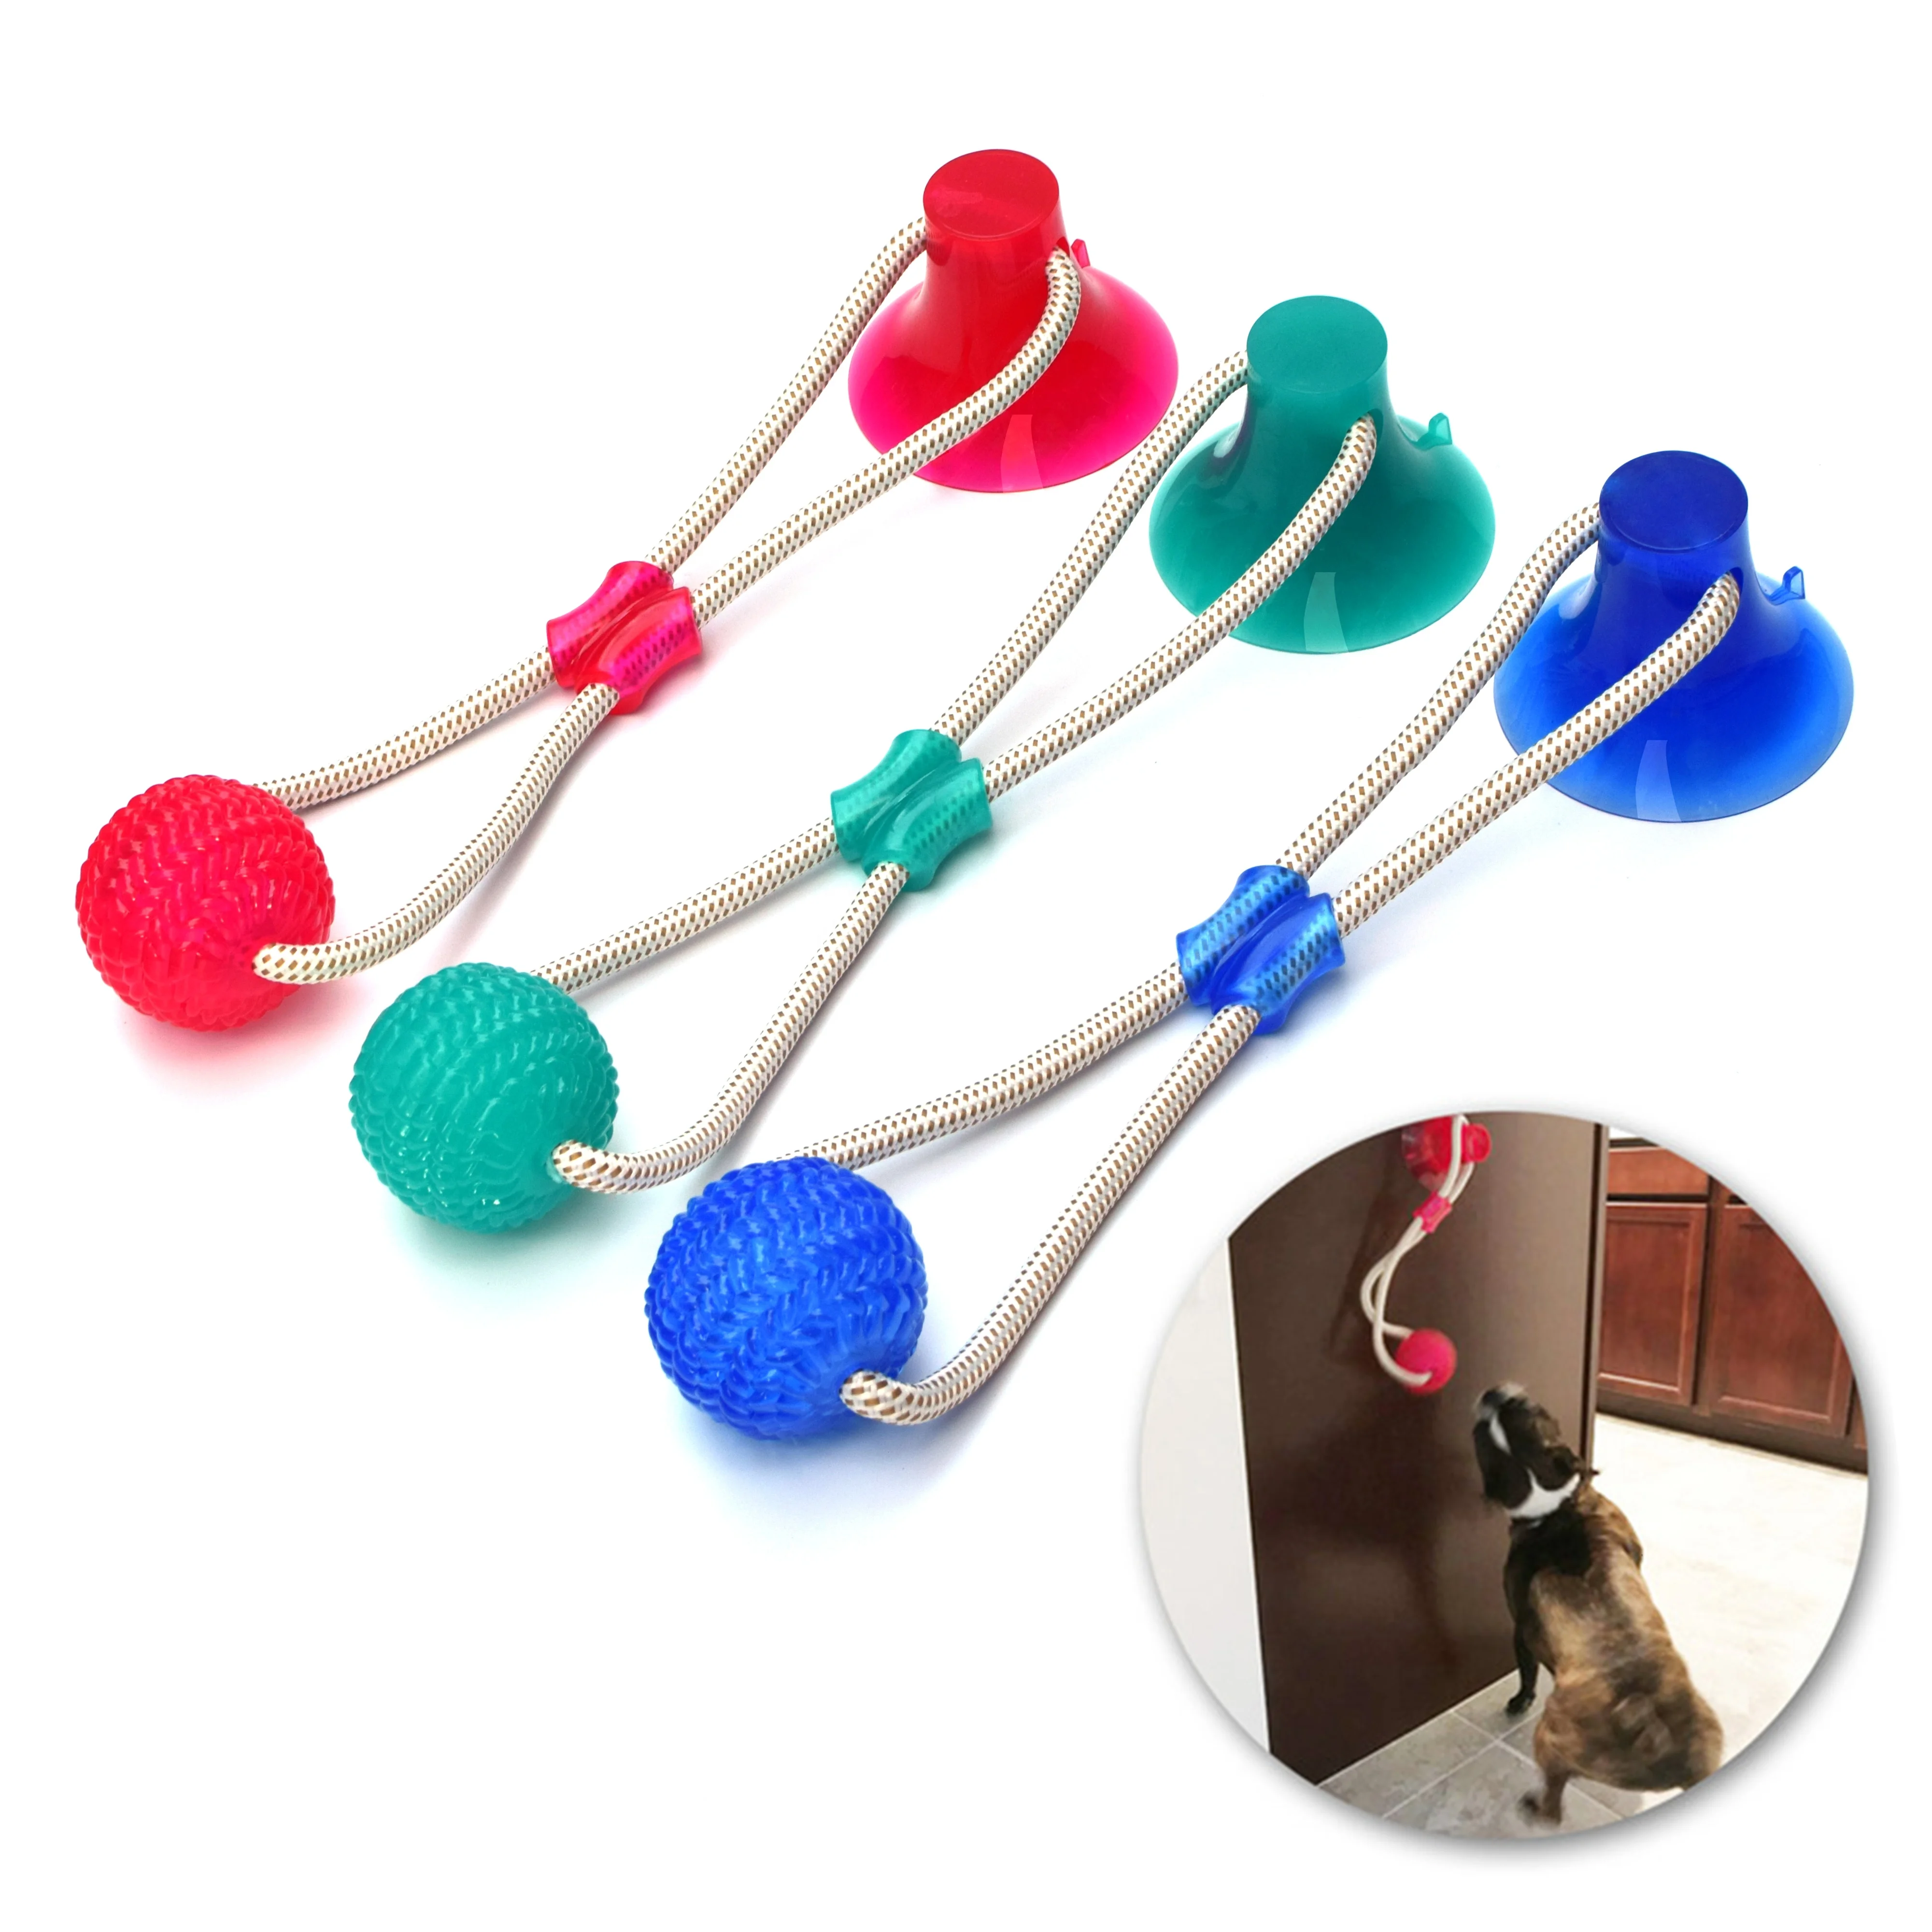 

Multifunction Pet Molar Bite Toys Interactive Rubber Chew Ball Cleaning Teeth Safe Elasticity TPR Soft Puppy Suction Cup Dog Toy, Green, red, blue, orange, purple, etc.